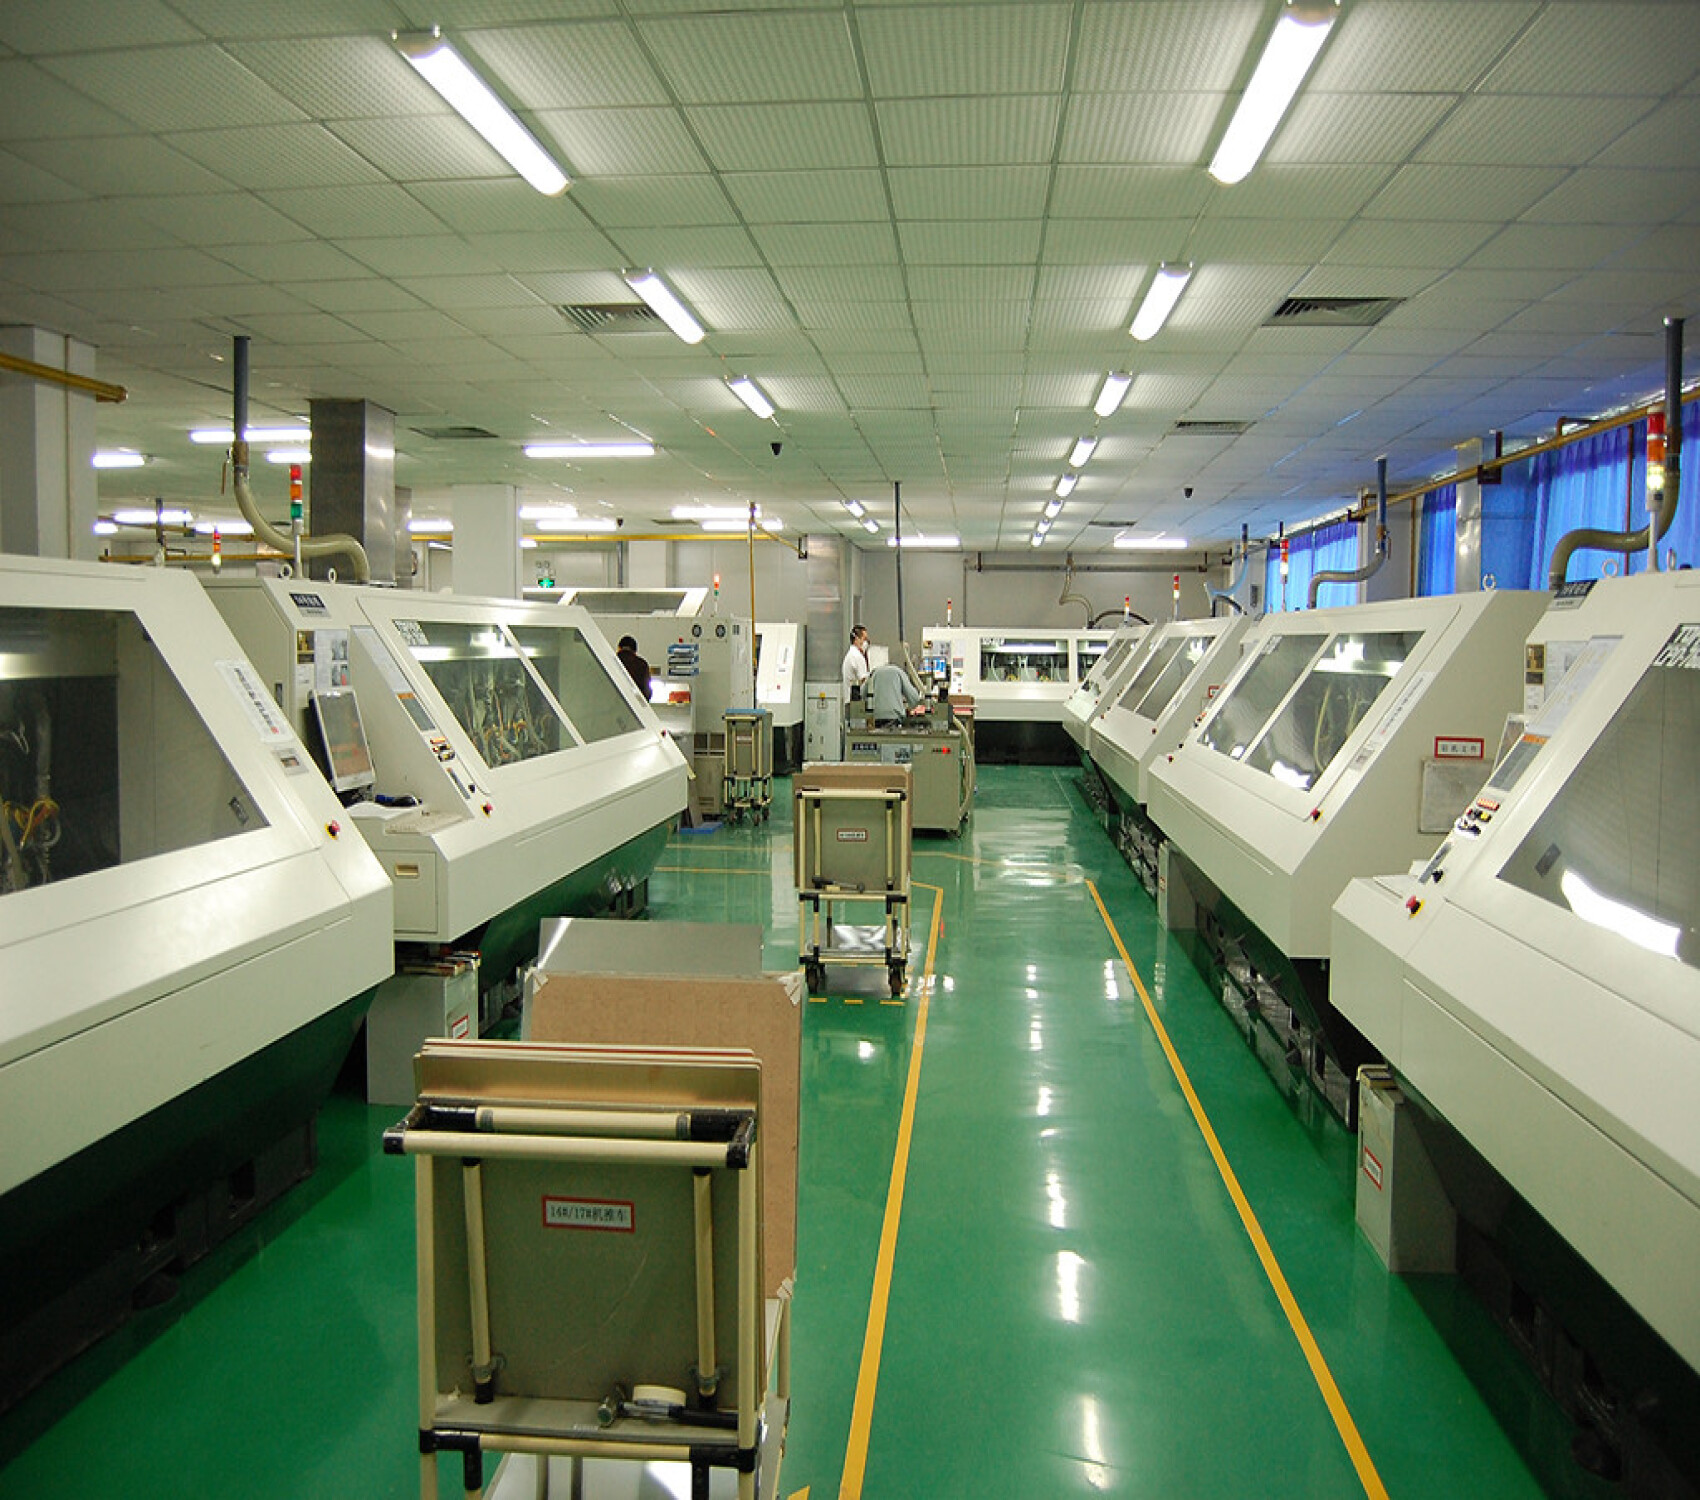 About PCB production equipment